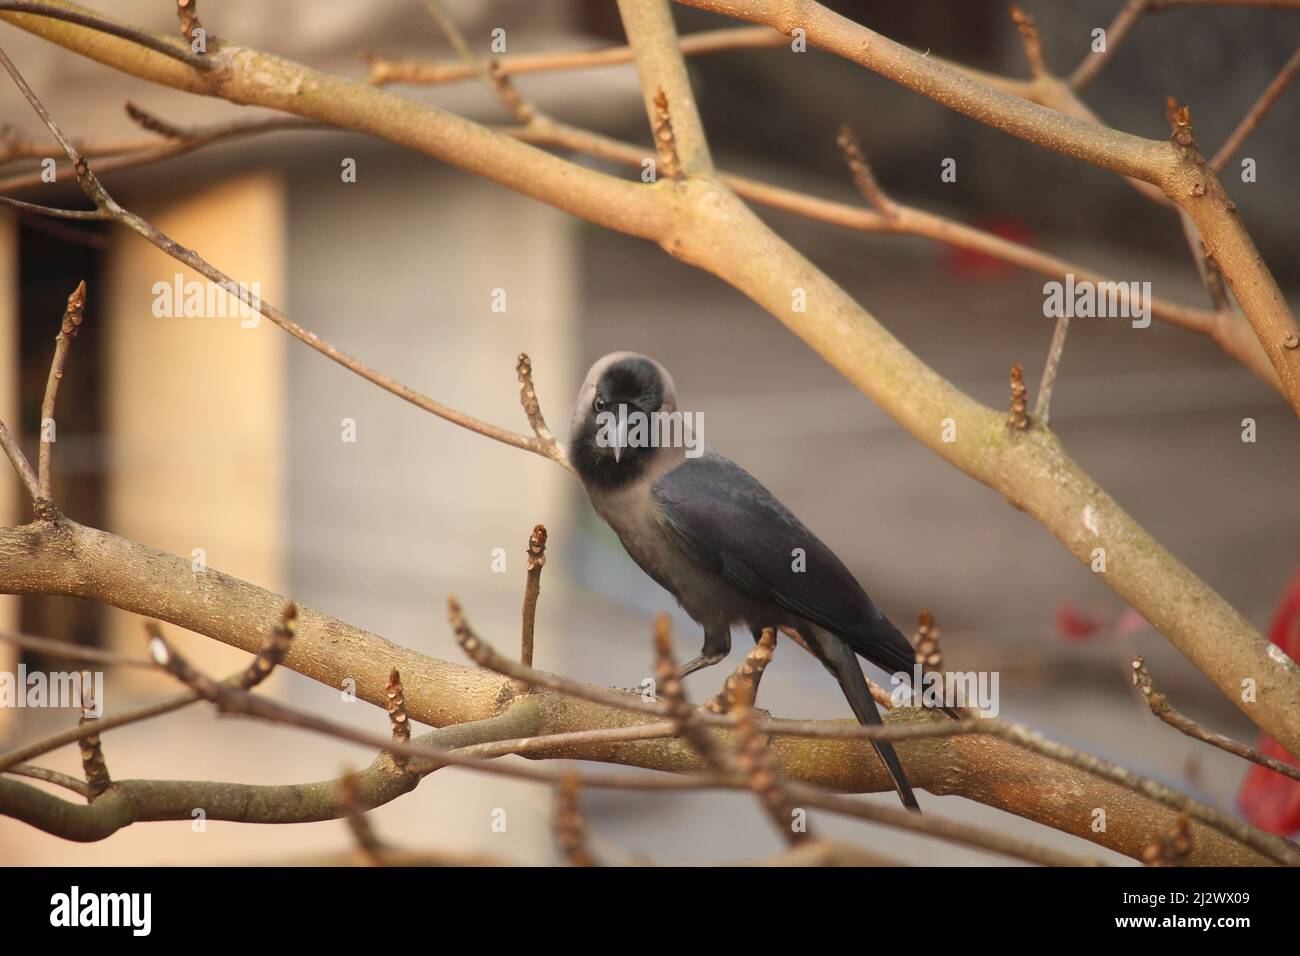 The black crow is sitting on the branch of the almond tree. Stock Photo